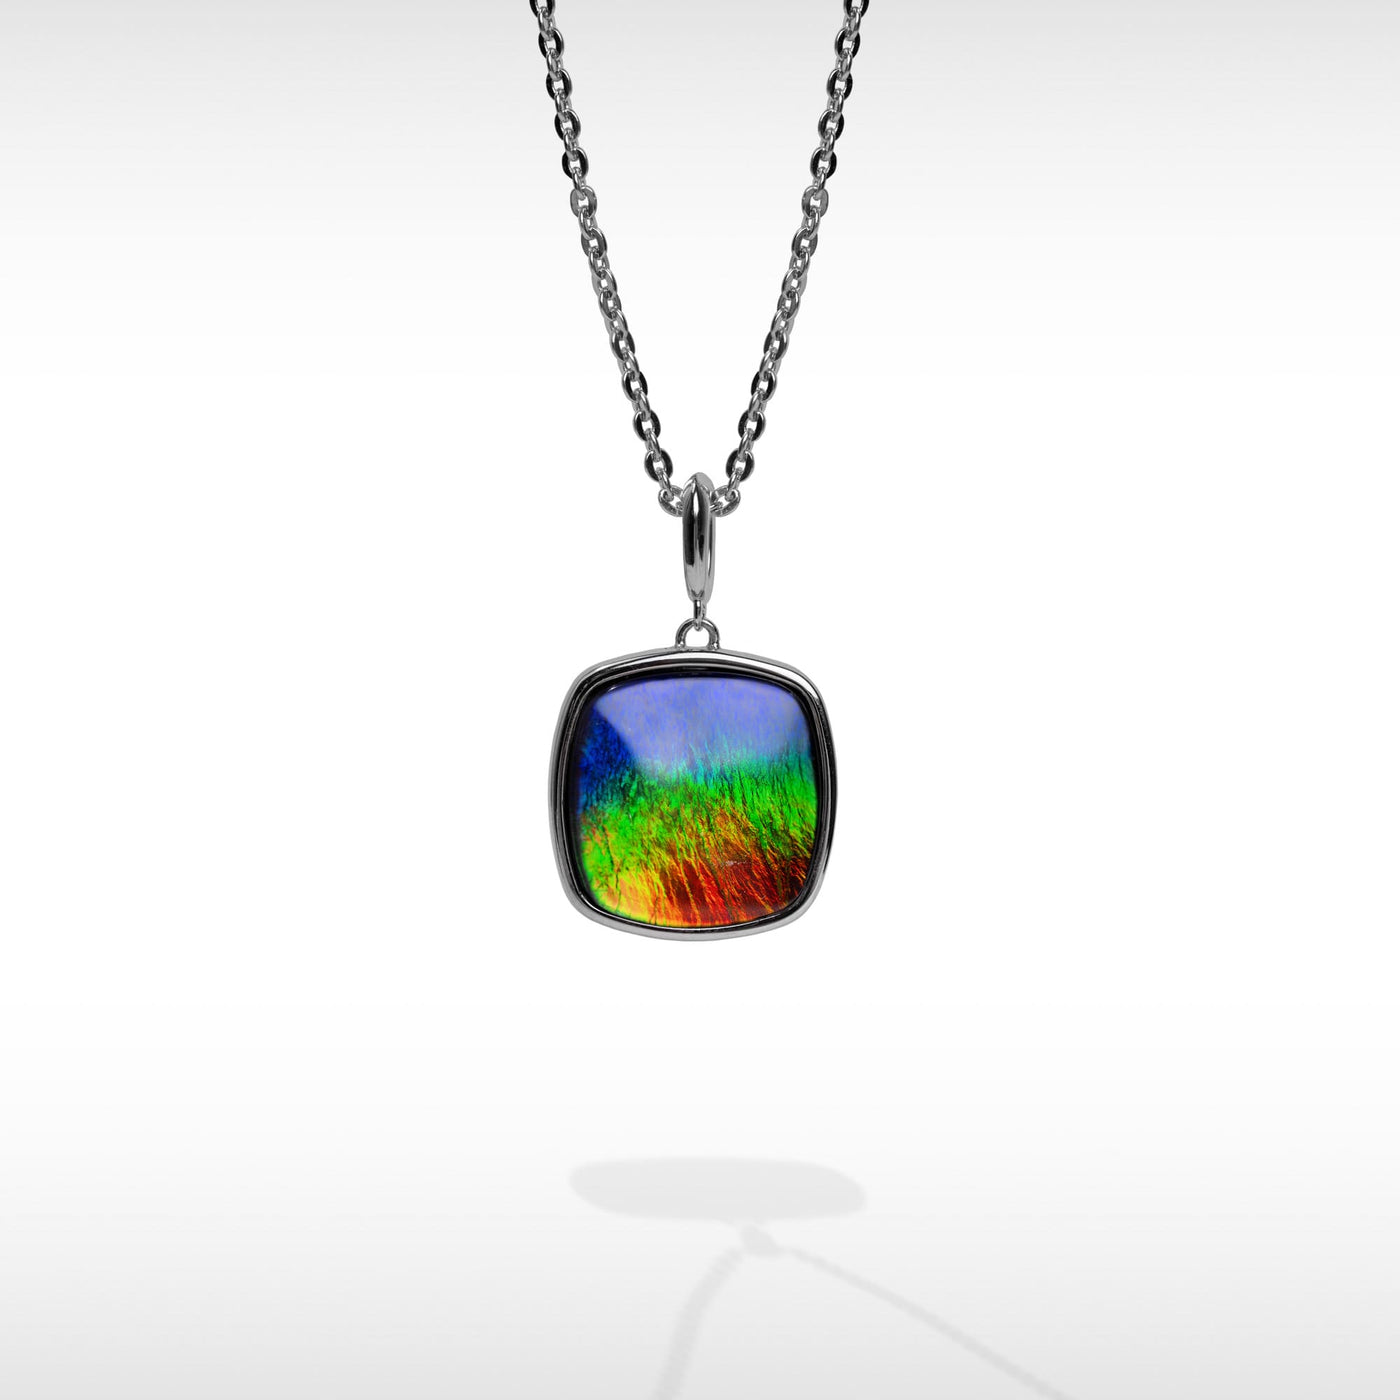 Origins cushion ammolite pendant,earring and ring set in sterling silver